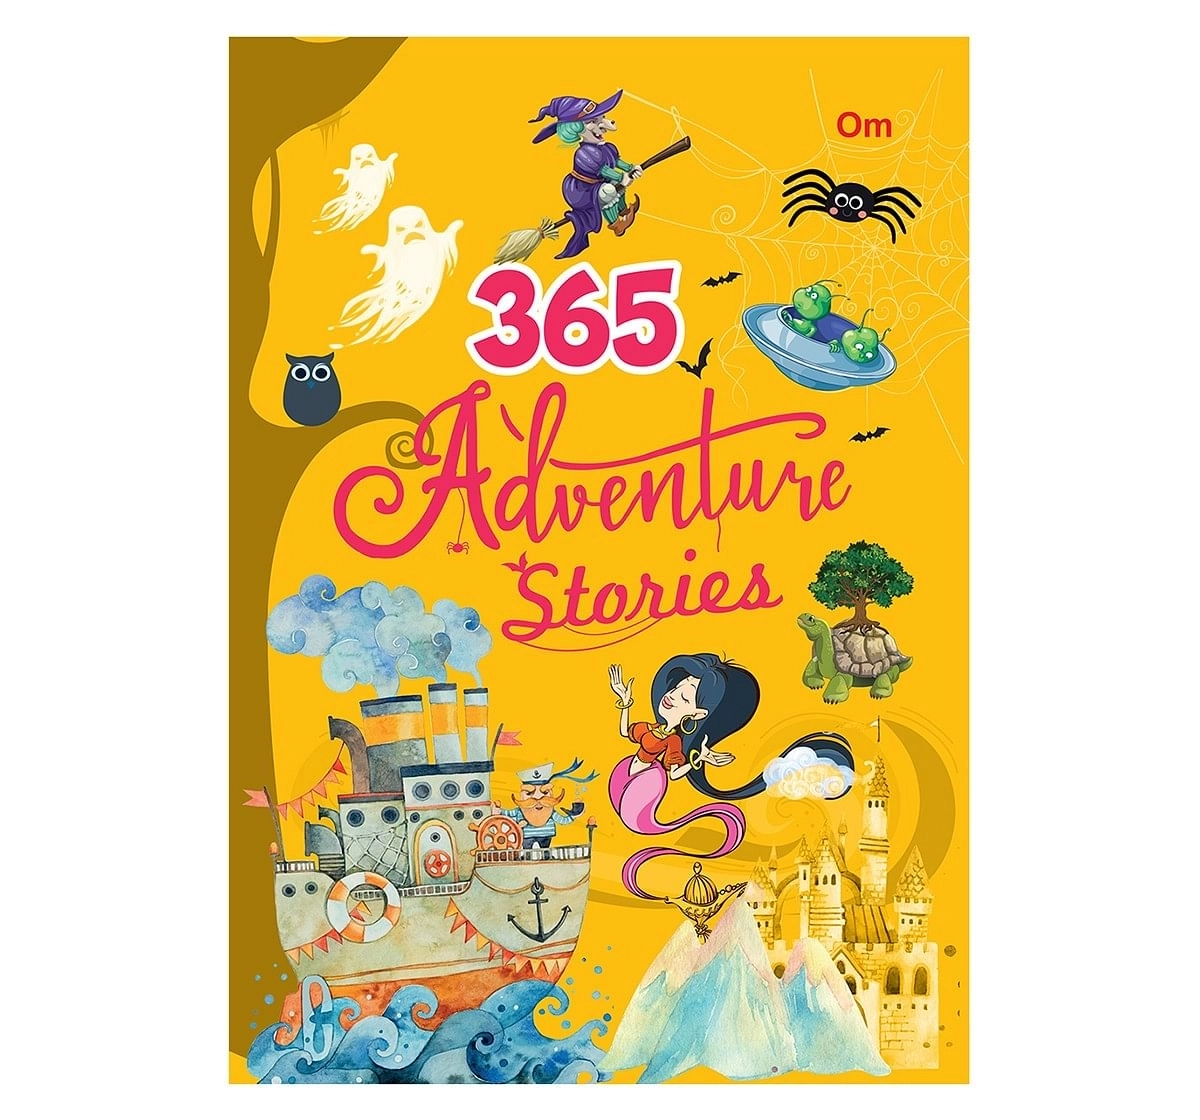 Om Books: 365 Adventure Stories, 236 Pages, Hardcover